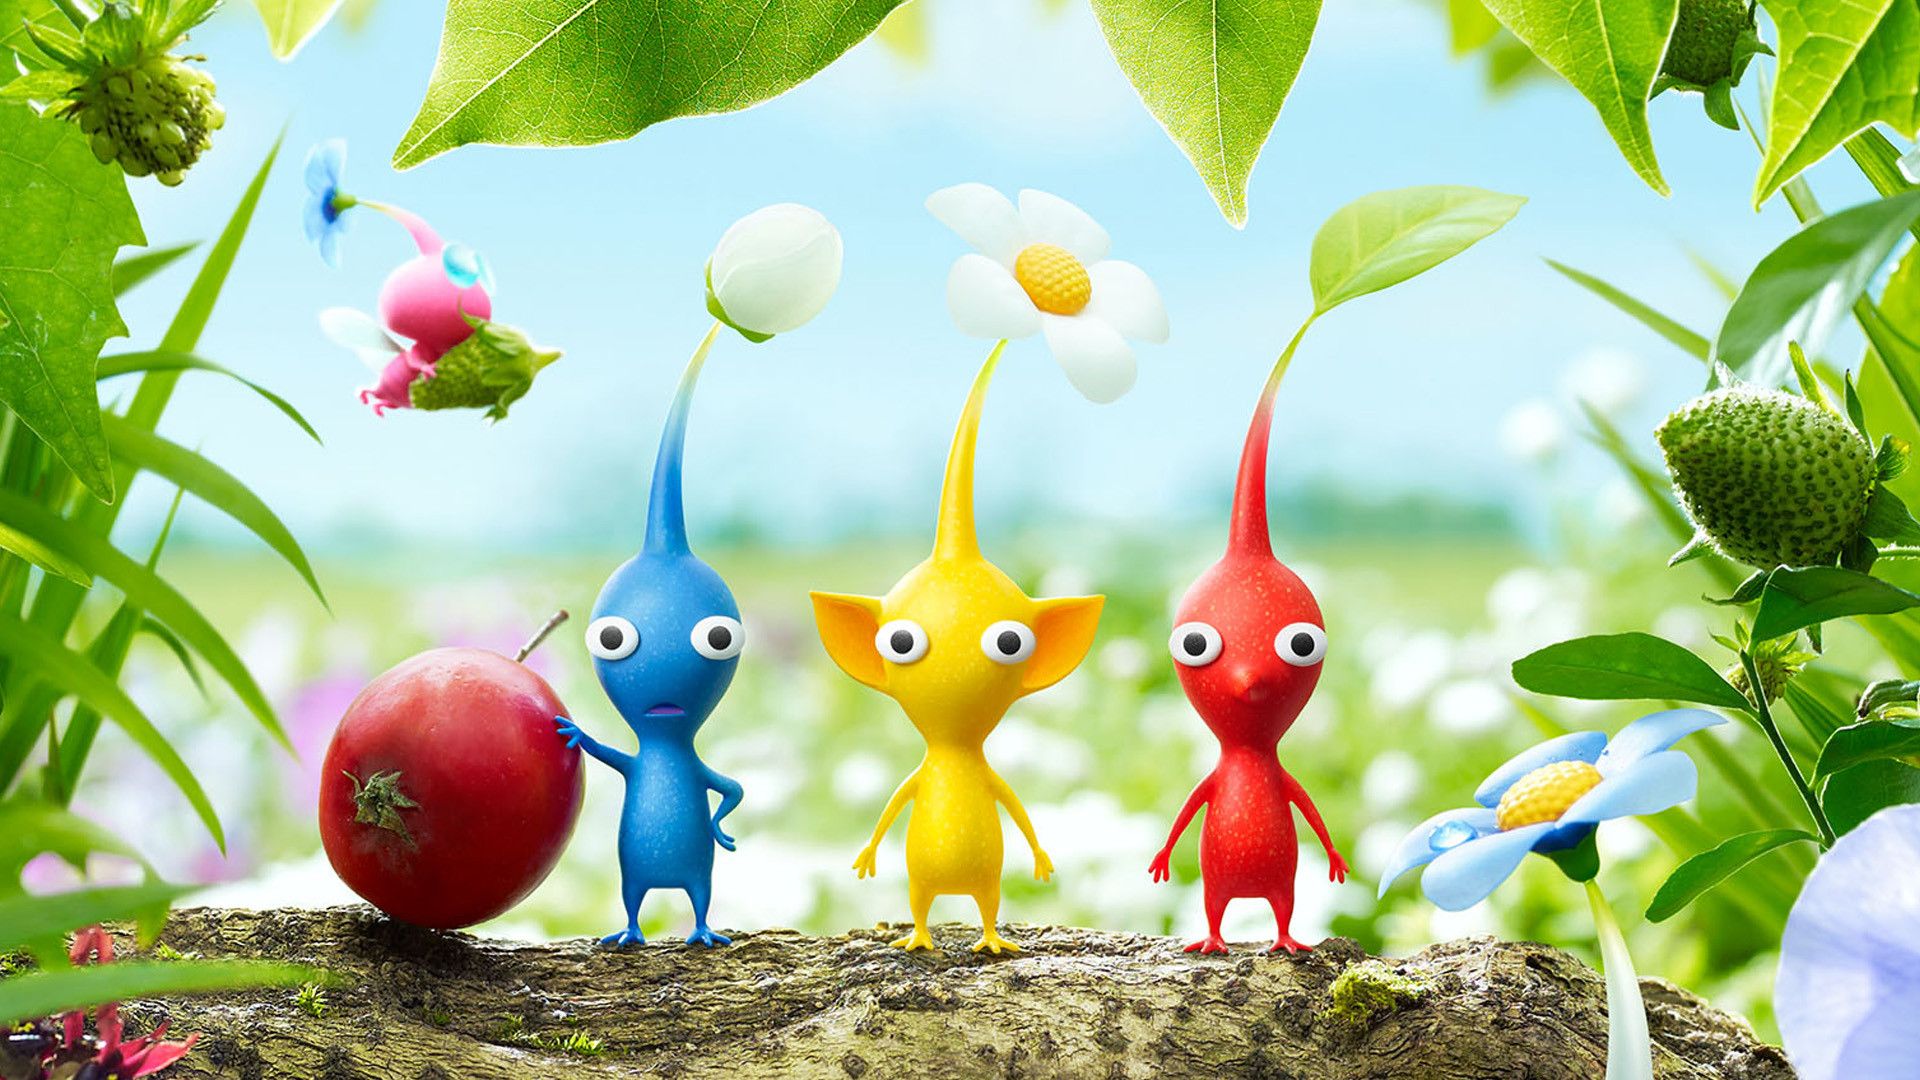 Pikmin 3 Wallpapers in HD | Page 1